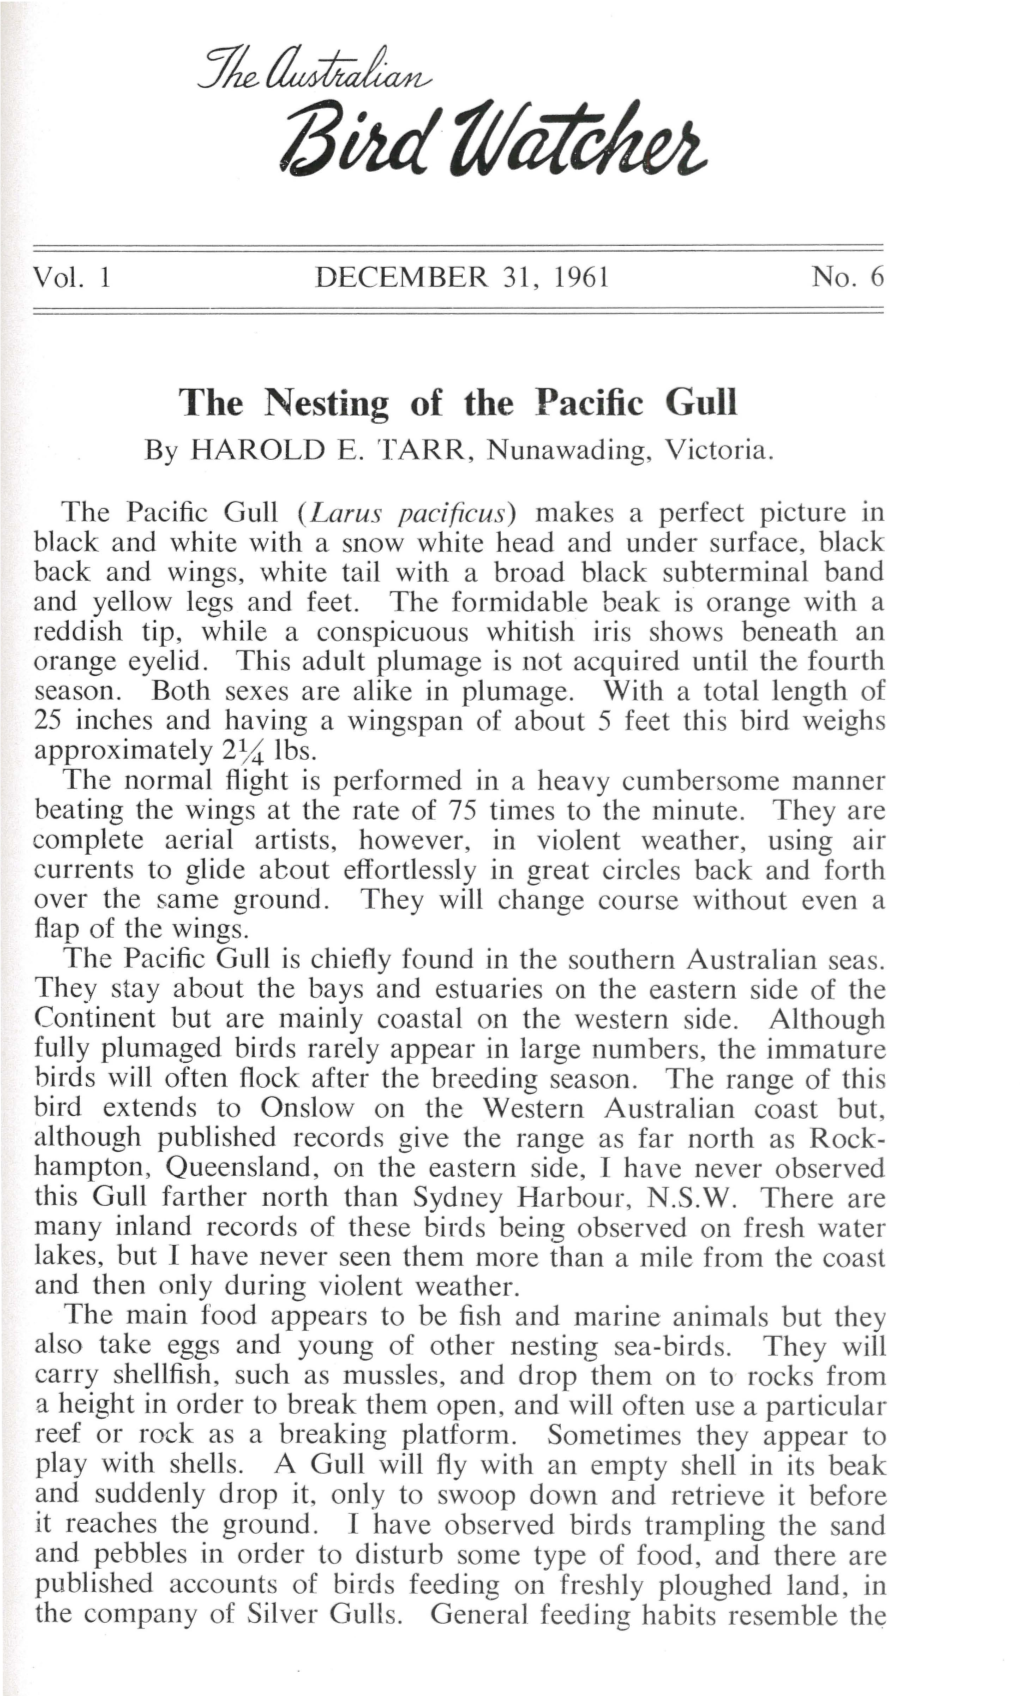 The Nesting of the Pacific Gull by HAROLD E